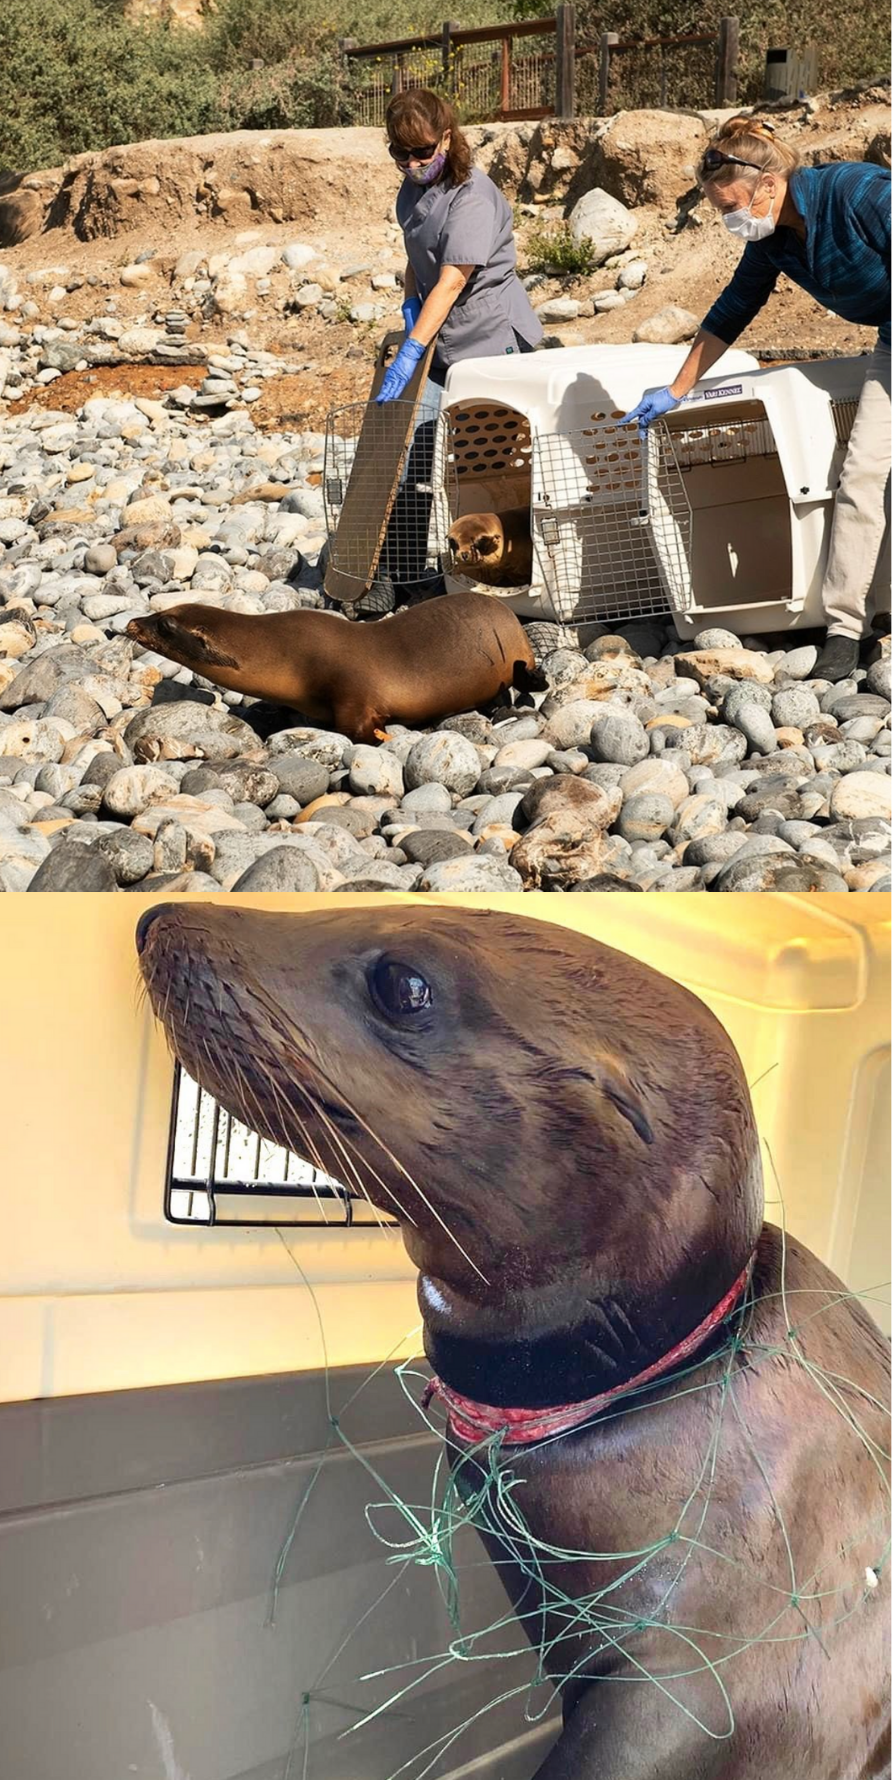 Top photo - Marine Mammal Care Center releasing sea lions after rehabilitation. Bottom Photo - A sea lion suffering with injury from fishing line/plastic pollution 